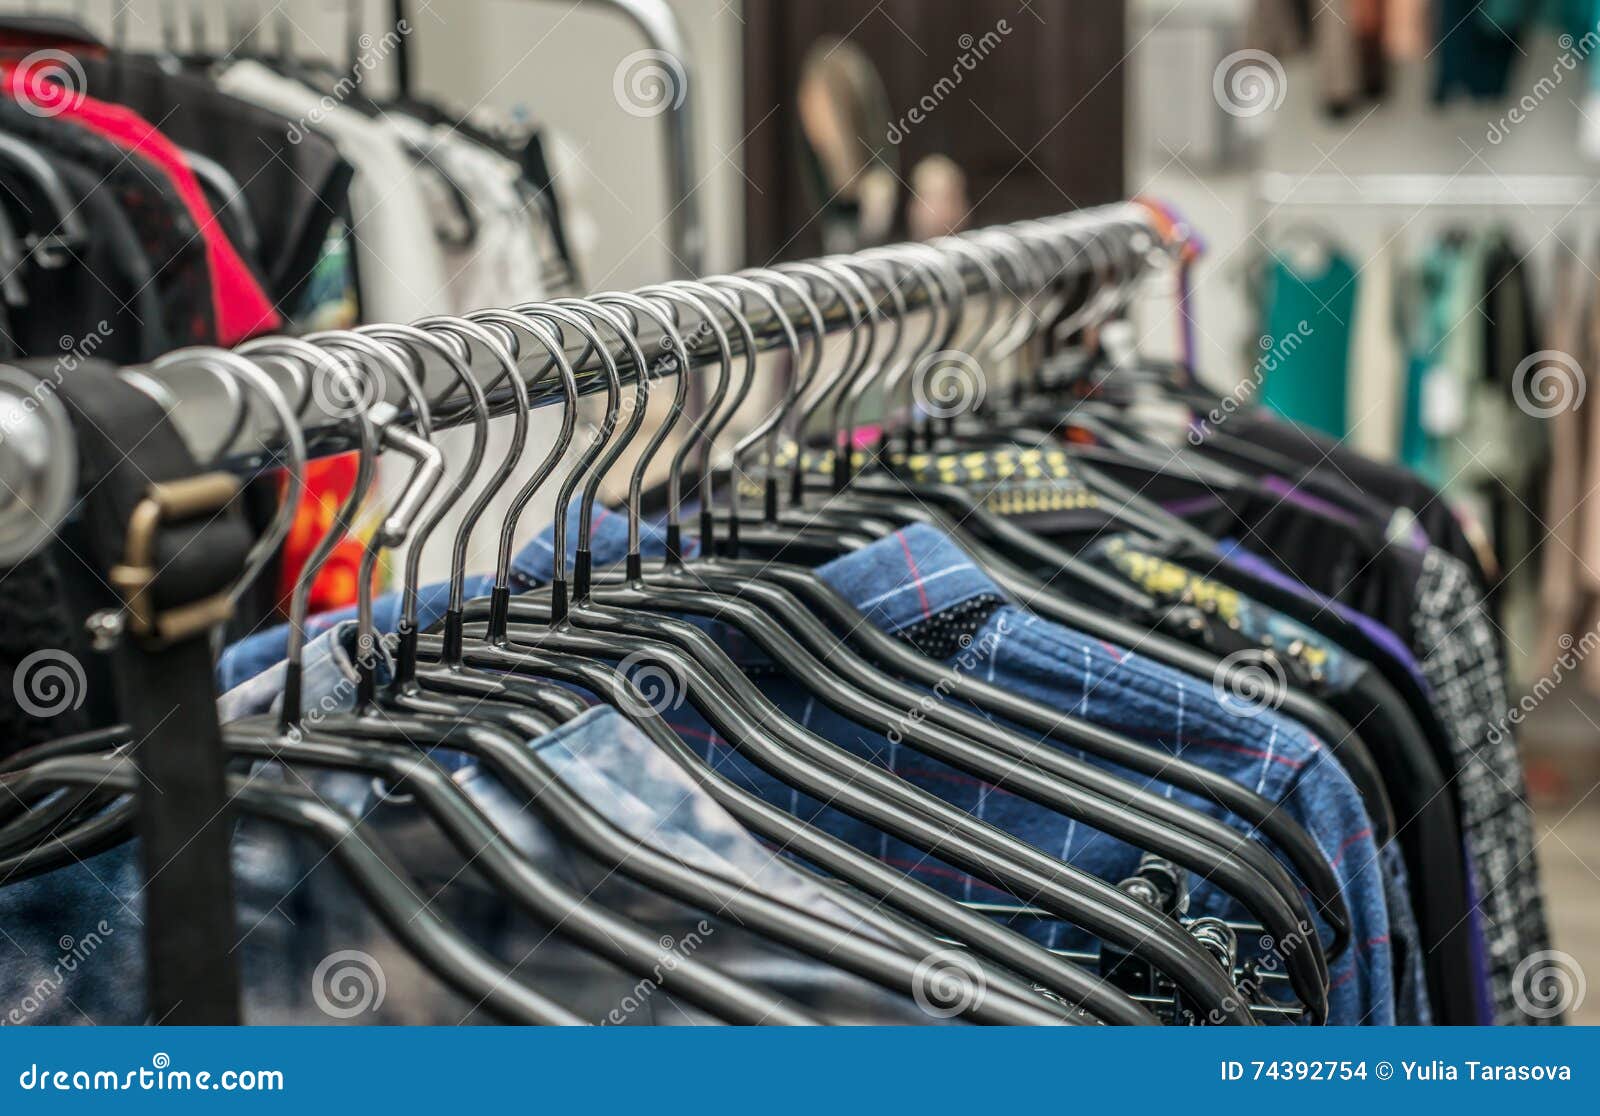 Clothes Hang on a Shelf in a Clothes Store Stock Photo - Image of ...